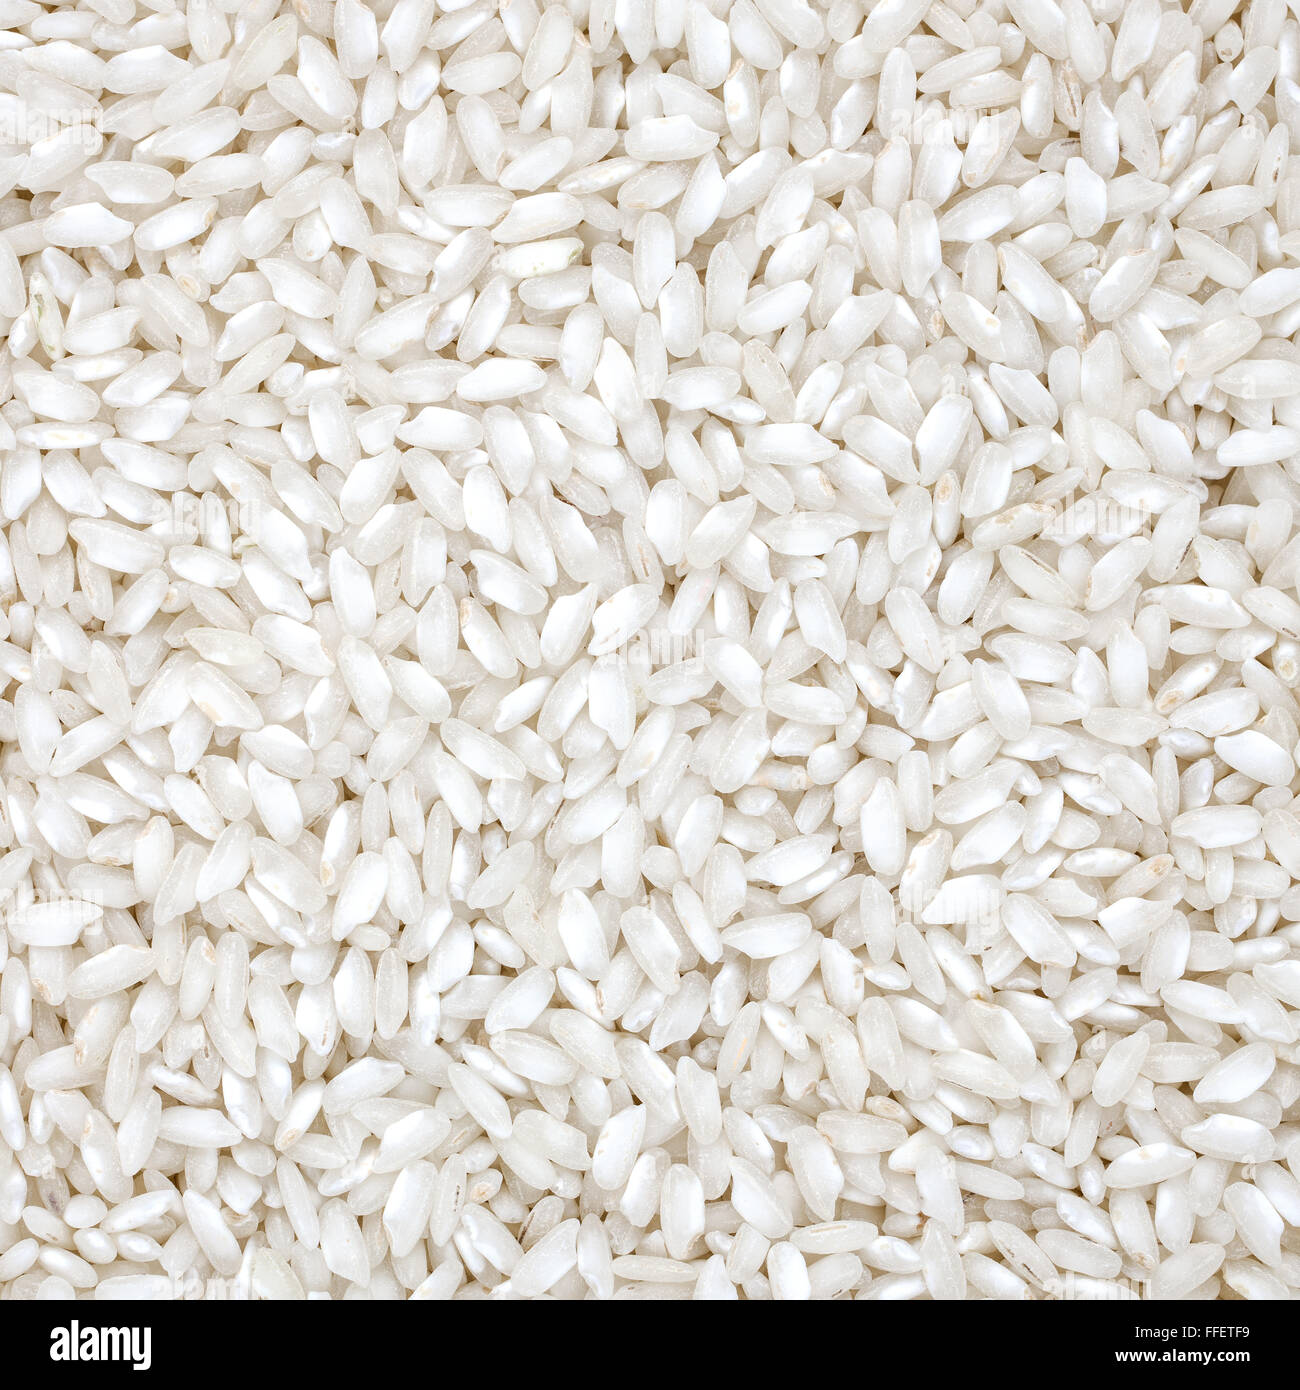 Rice organic wheat raw cereal close up texture or background. Italian healthy eating Stock Photo